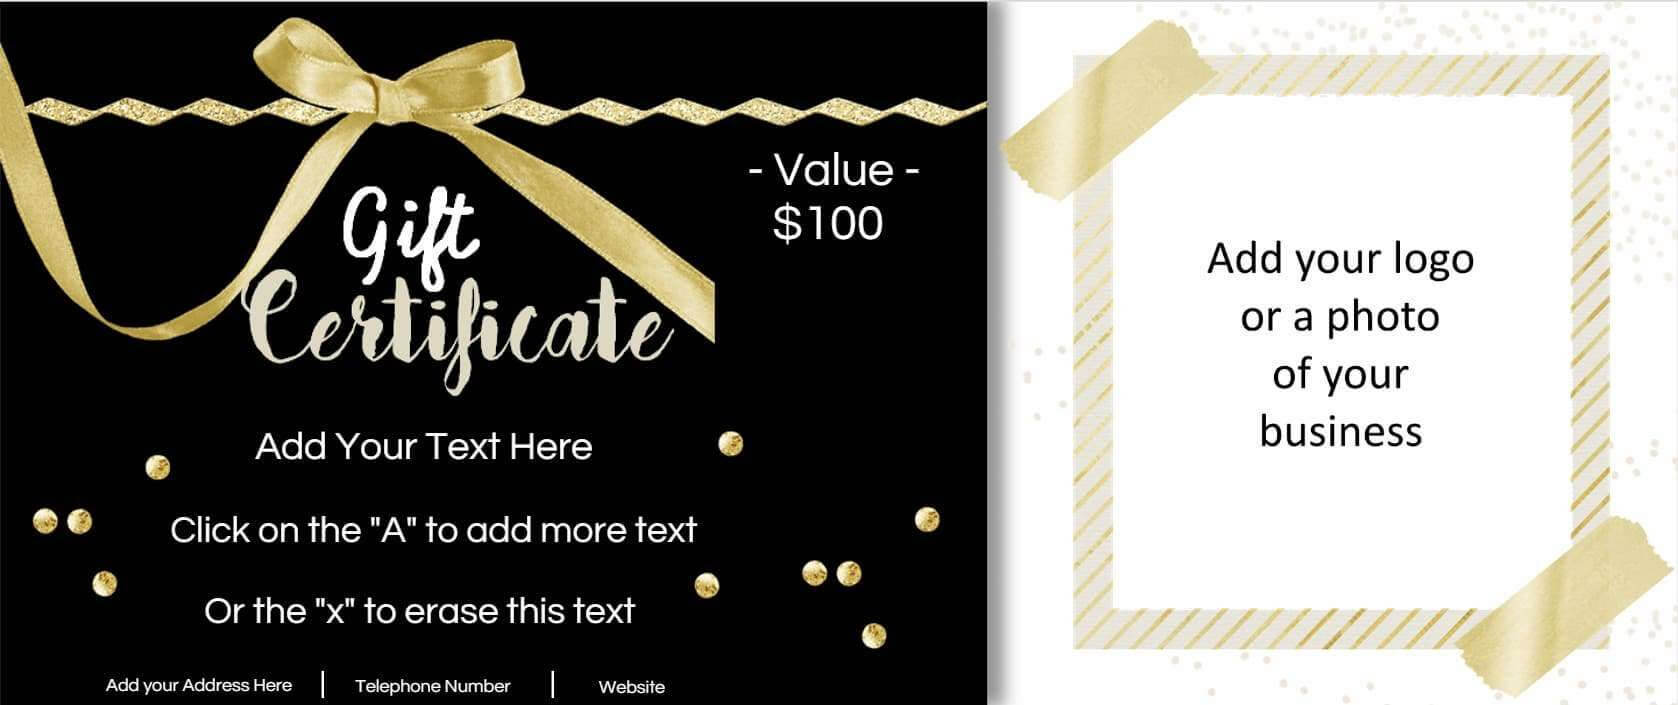 Image Result For Free Customizable Gift Certificate Template Intended For Custom Gift Certificate Template